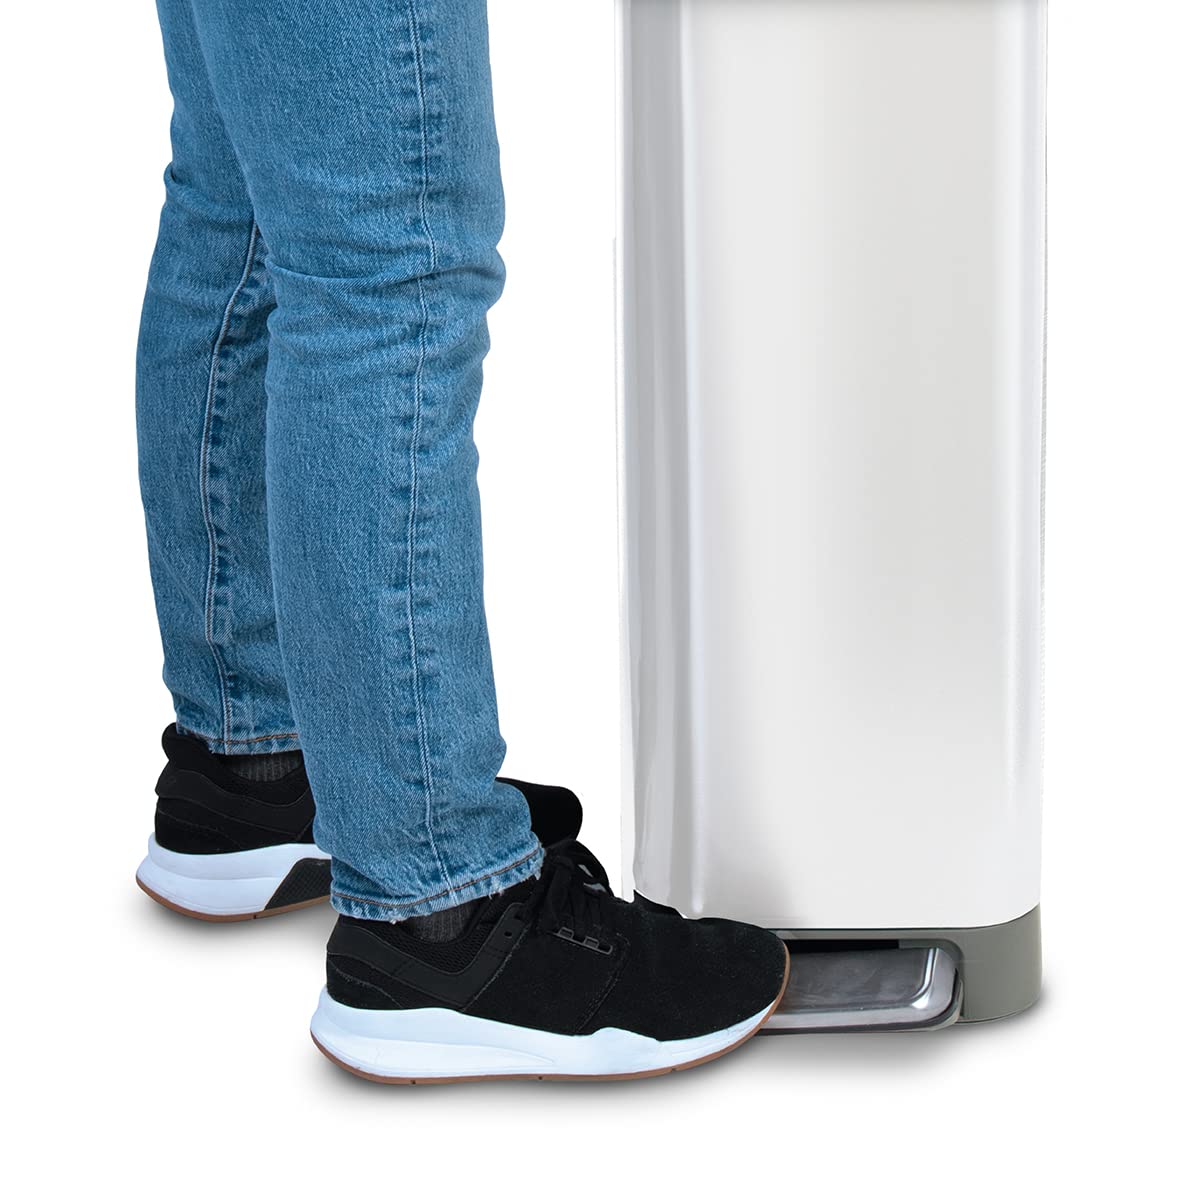 https://bigbigmart.com/wp-content/uploads/2023/10/Glad-Slim-Trash-Can-with-Clorox-Odor-Protection-Narrow-Kitchen-Garbage-Bin-with-Soft-Close-Lid-Step-On-Foot-Pedal-and-Waste-Bag-Roll-Holder-White-Stainless-Steel-45-Liter7.jpg